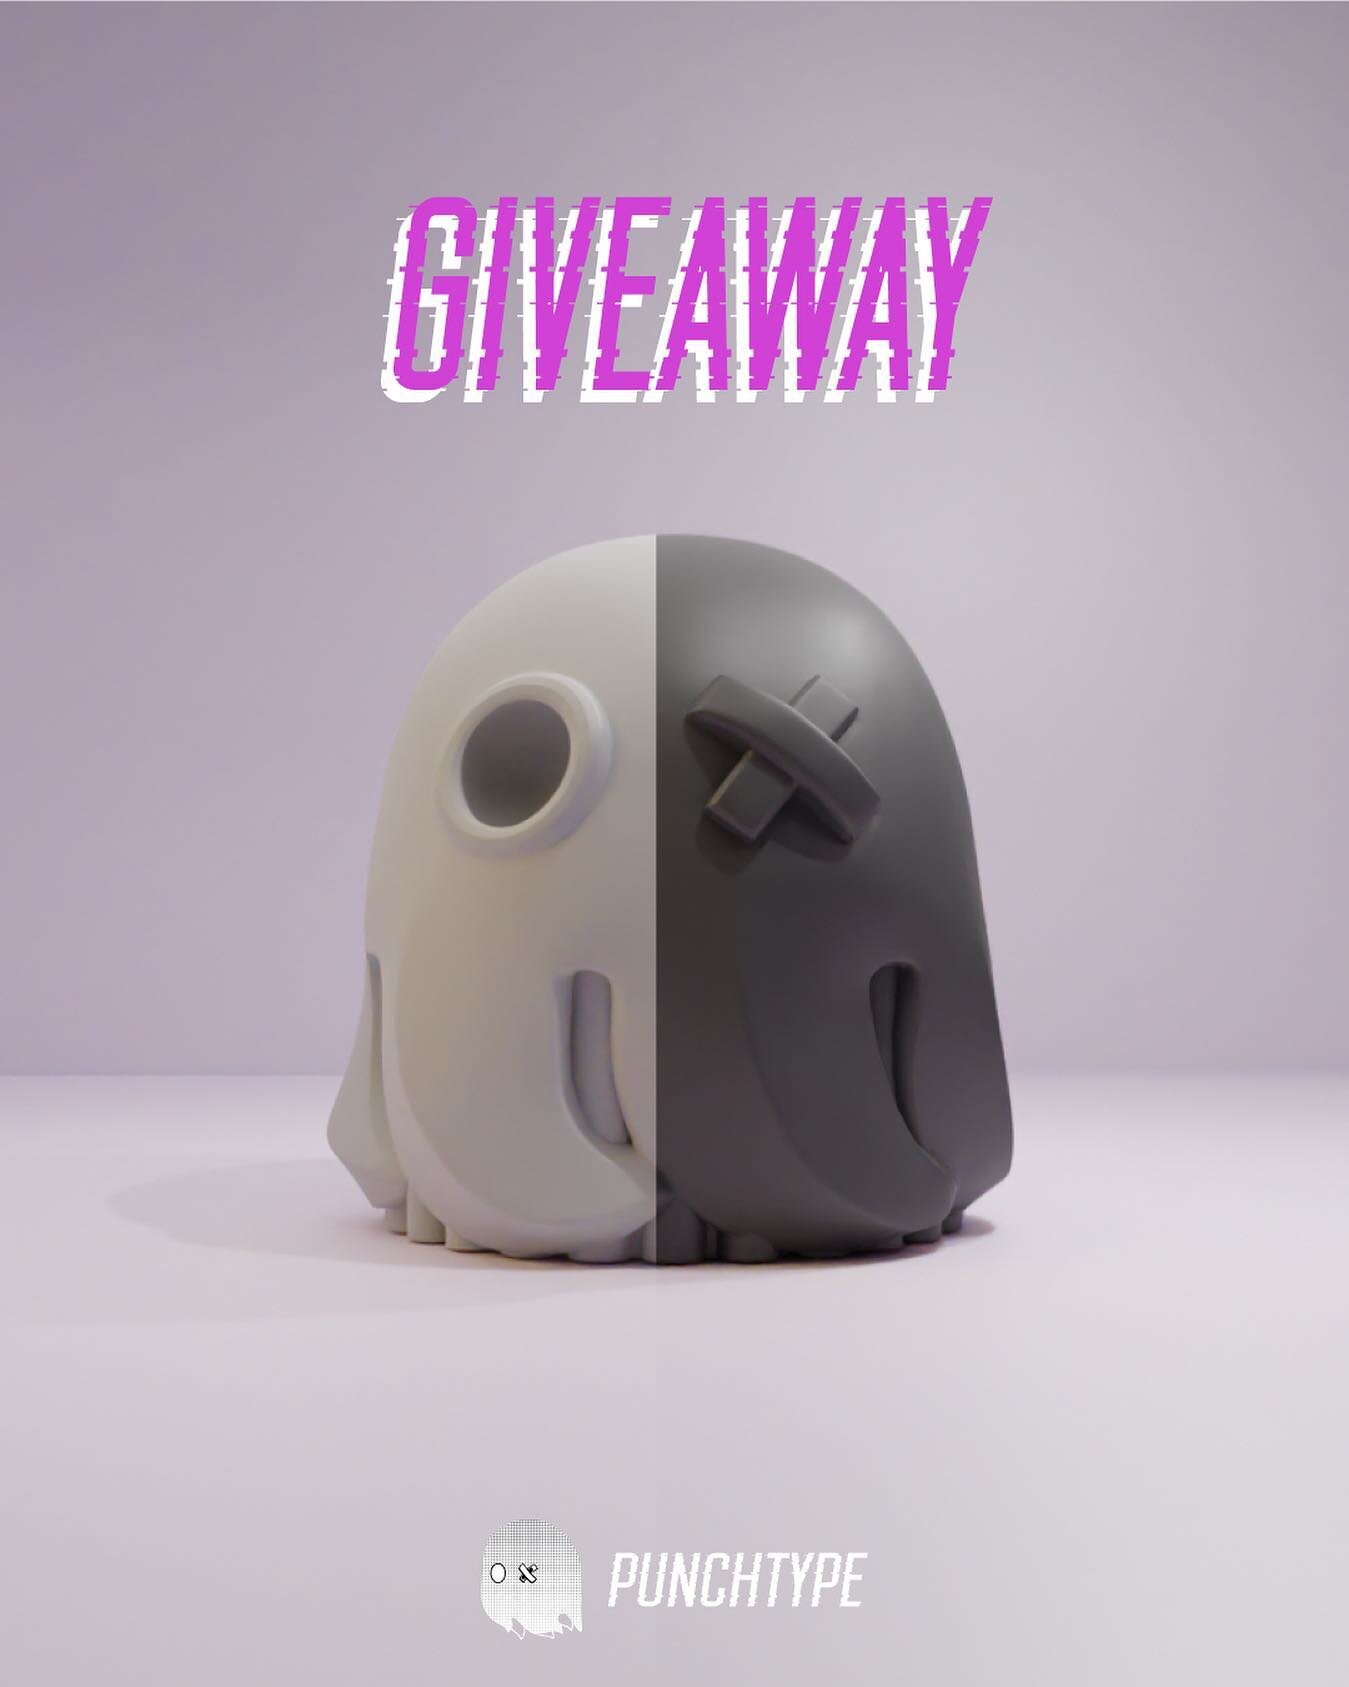 👻 GIVEAWAY 👻

To celebrate our first launch on Friday we are giving away 1 Ghost Encoder and 1 Ghost Artisan in the colourway of your choice! 

To enter you need to: 

👻 follow our Instagram 
👻 Tag a Friend and comment your current keyboard. 

Wi